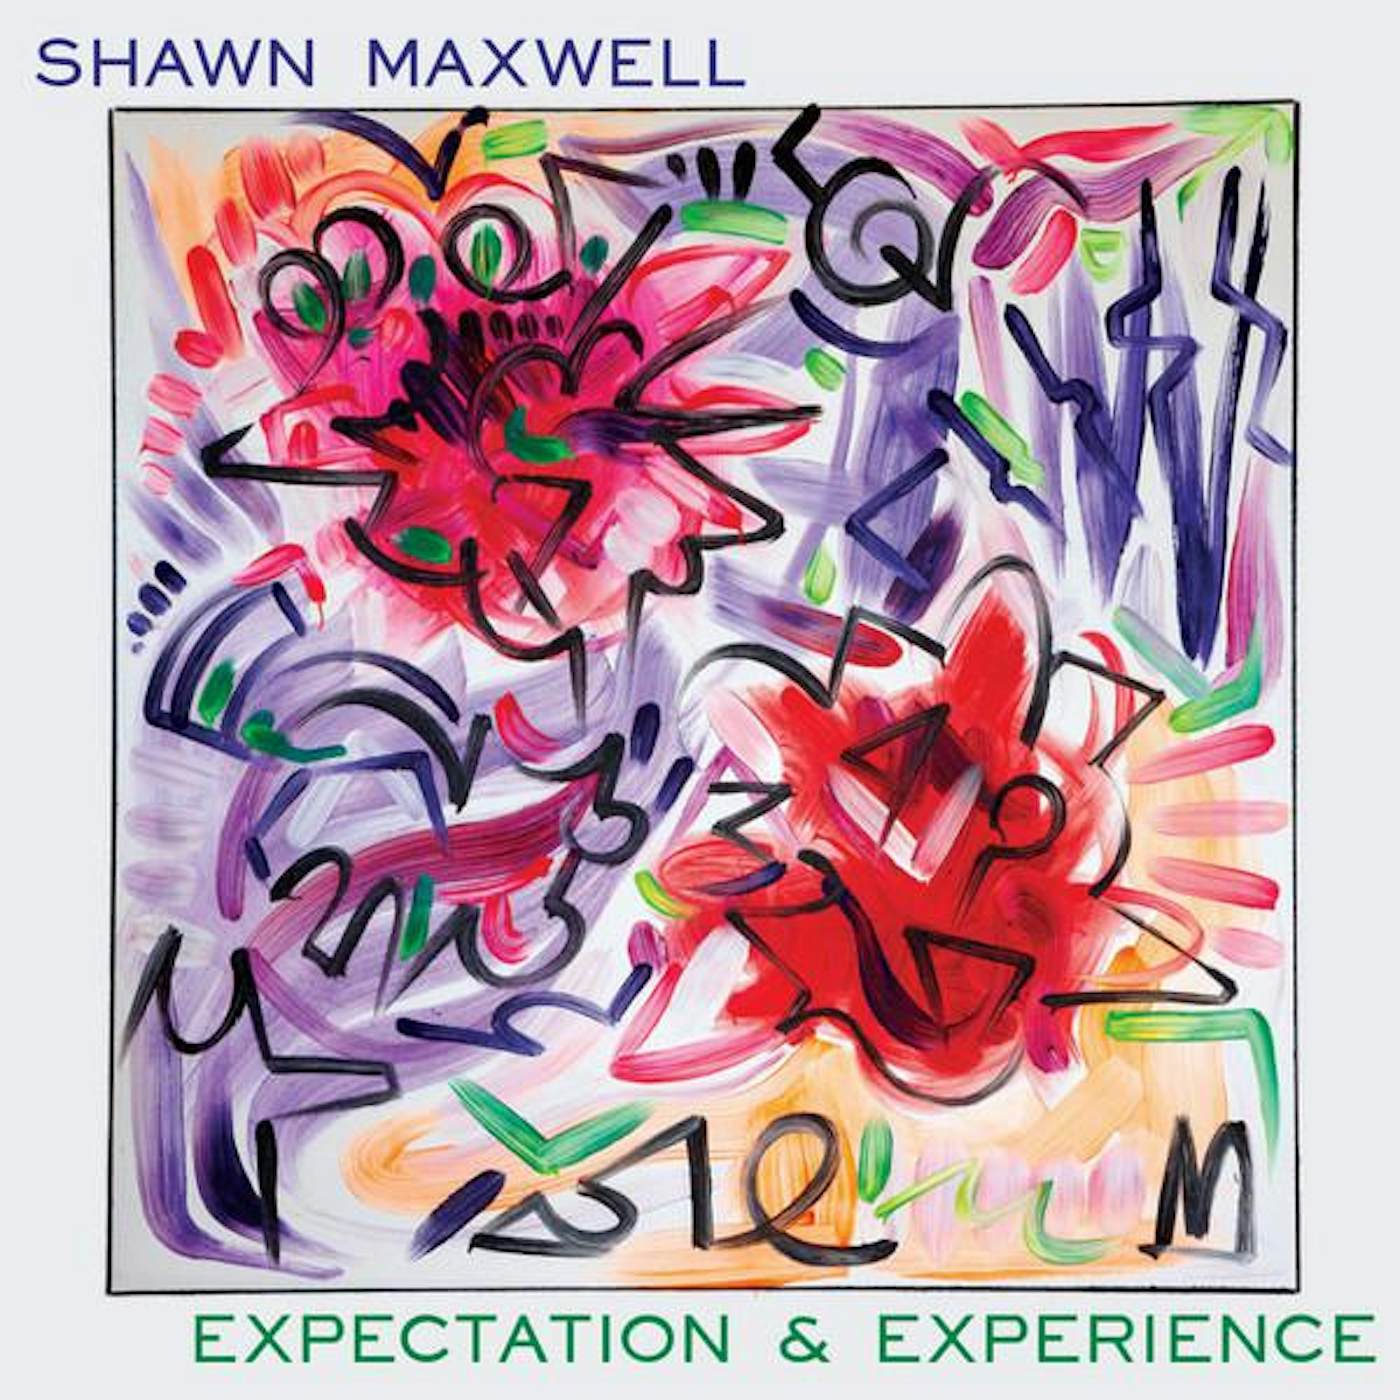 Shawn Maxwell EXPECTATION & EXPERIENCE CD